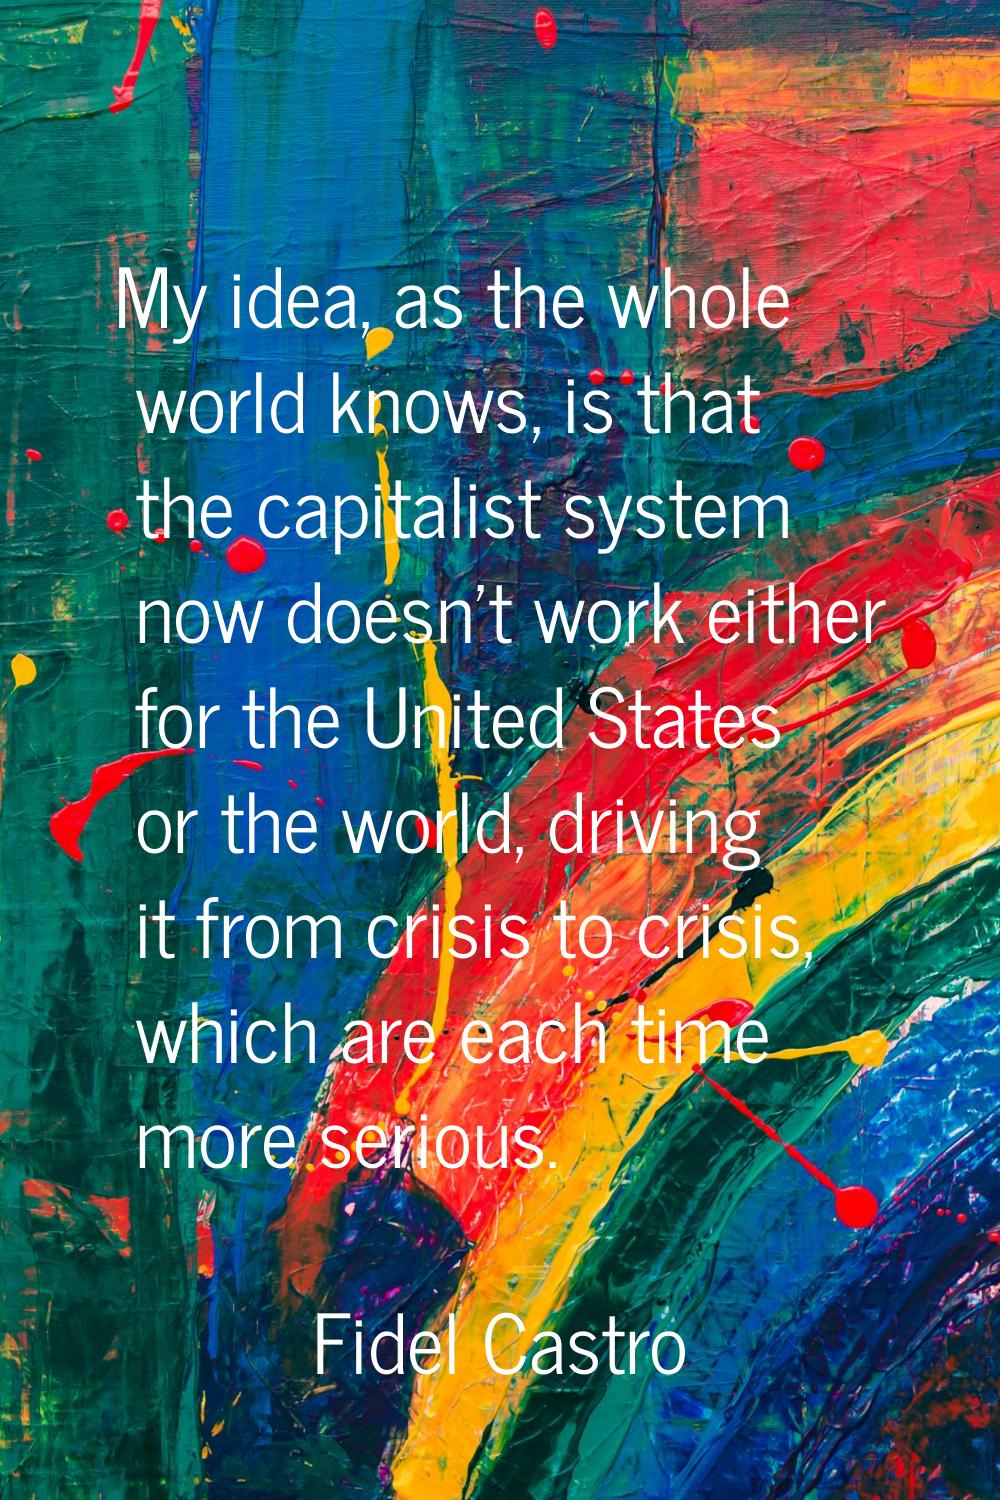 My idea, as the whole world knows, is that the capitalist system now doesn't work either for the Un